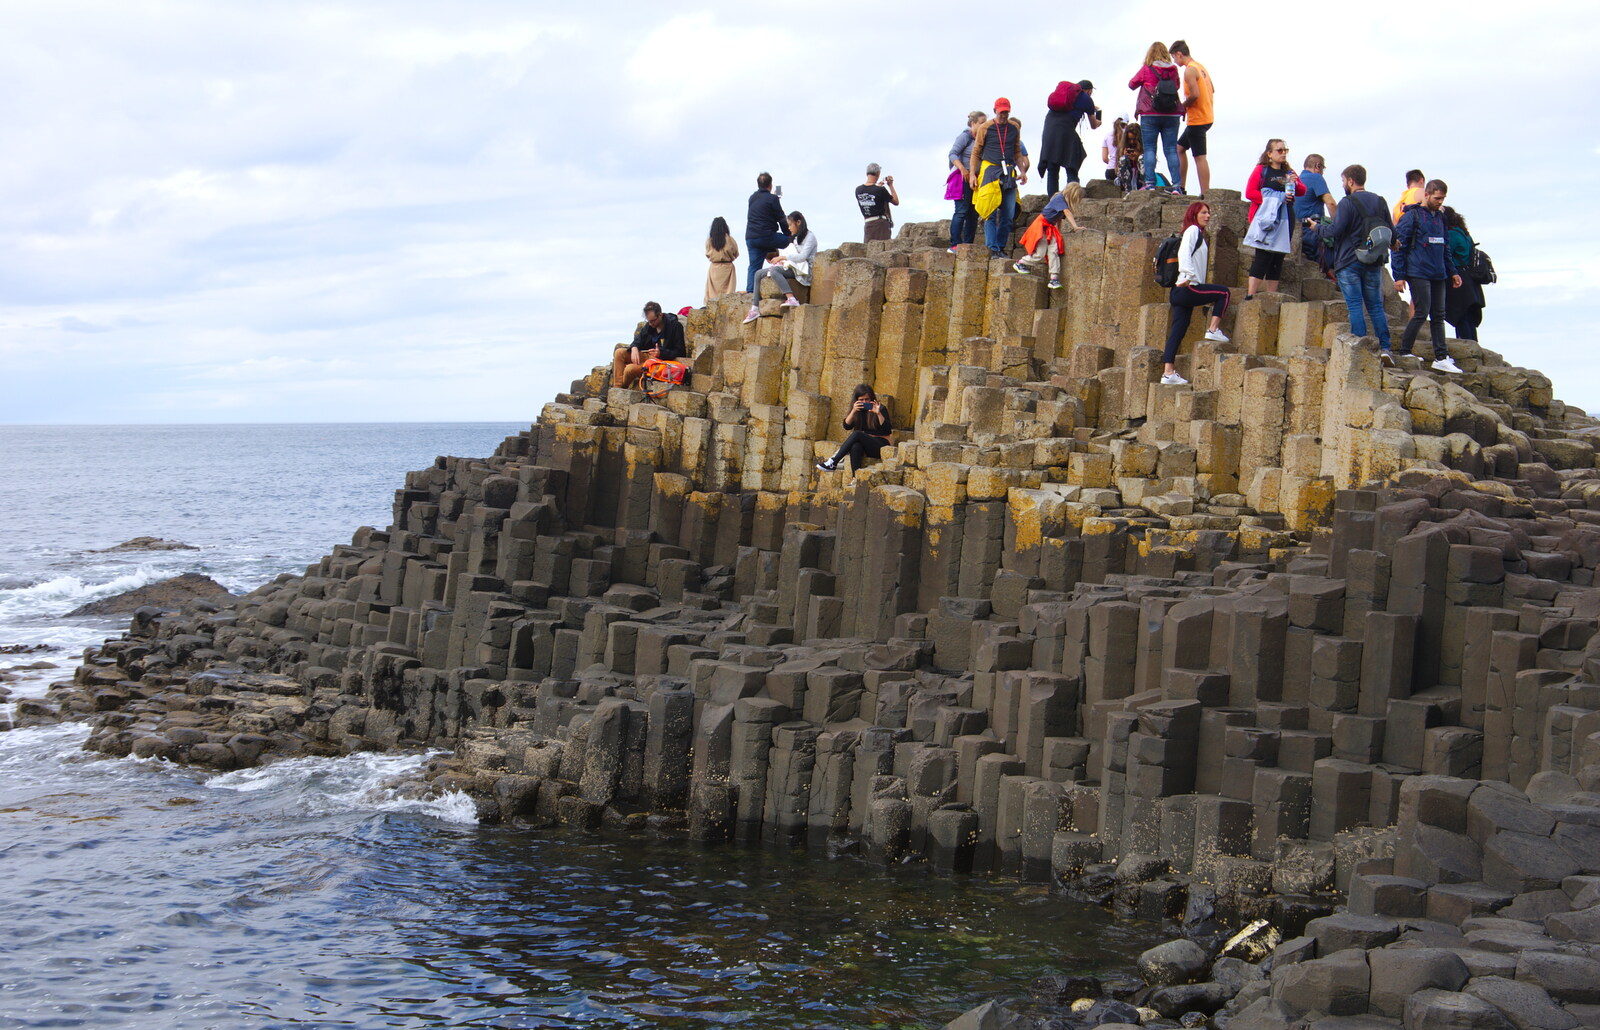 People swarm all over basalt columns from The Giant's Causeway, Bushmills, County Antrim, Northern Ireland - 14th August 2019